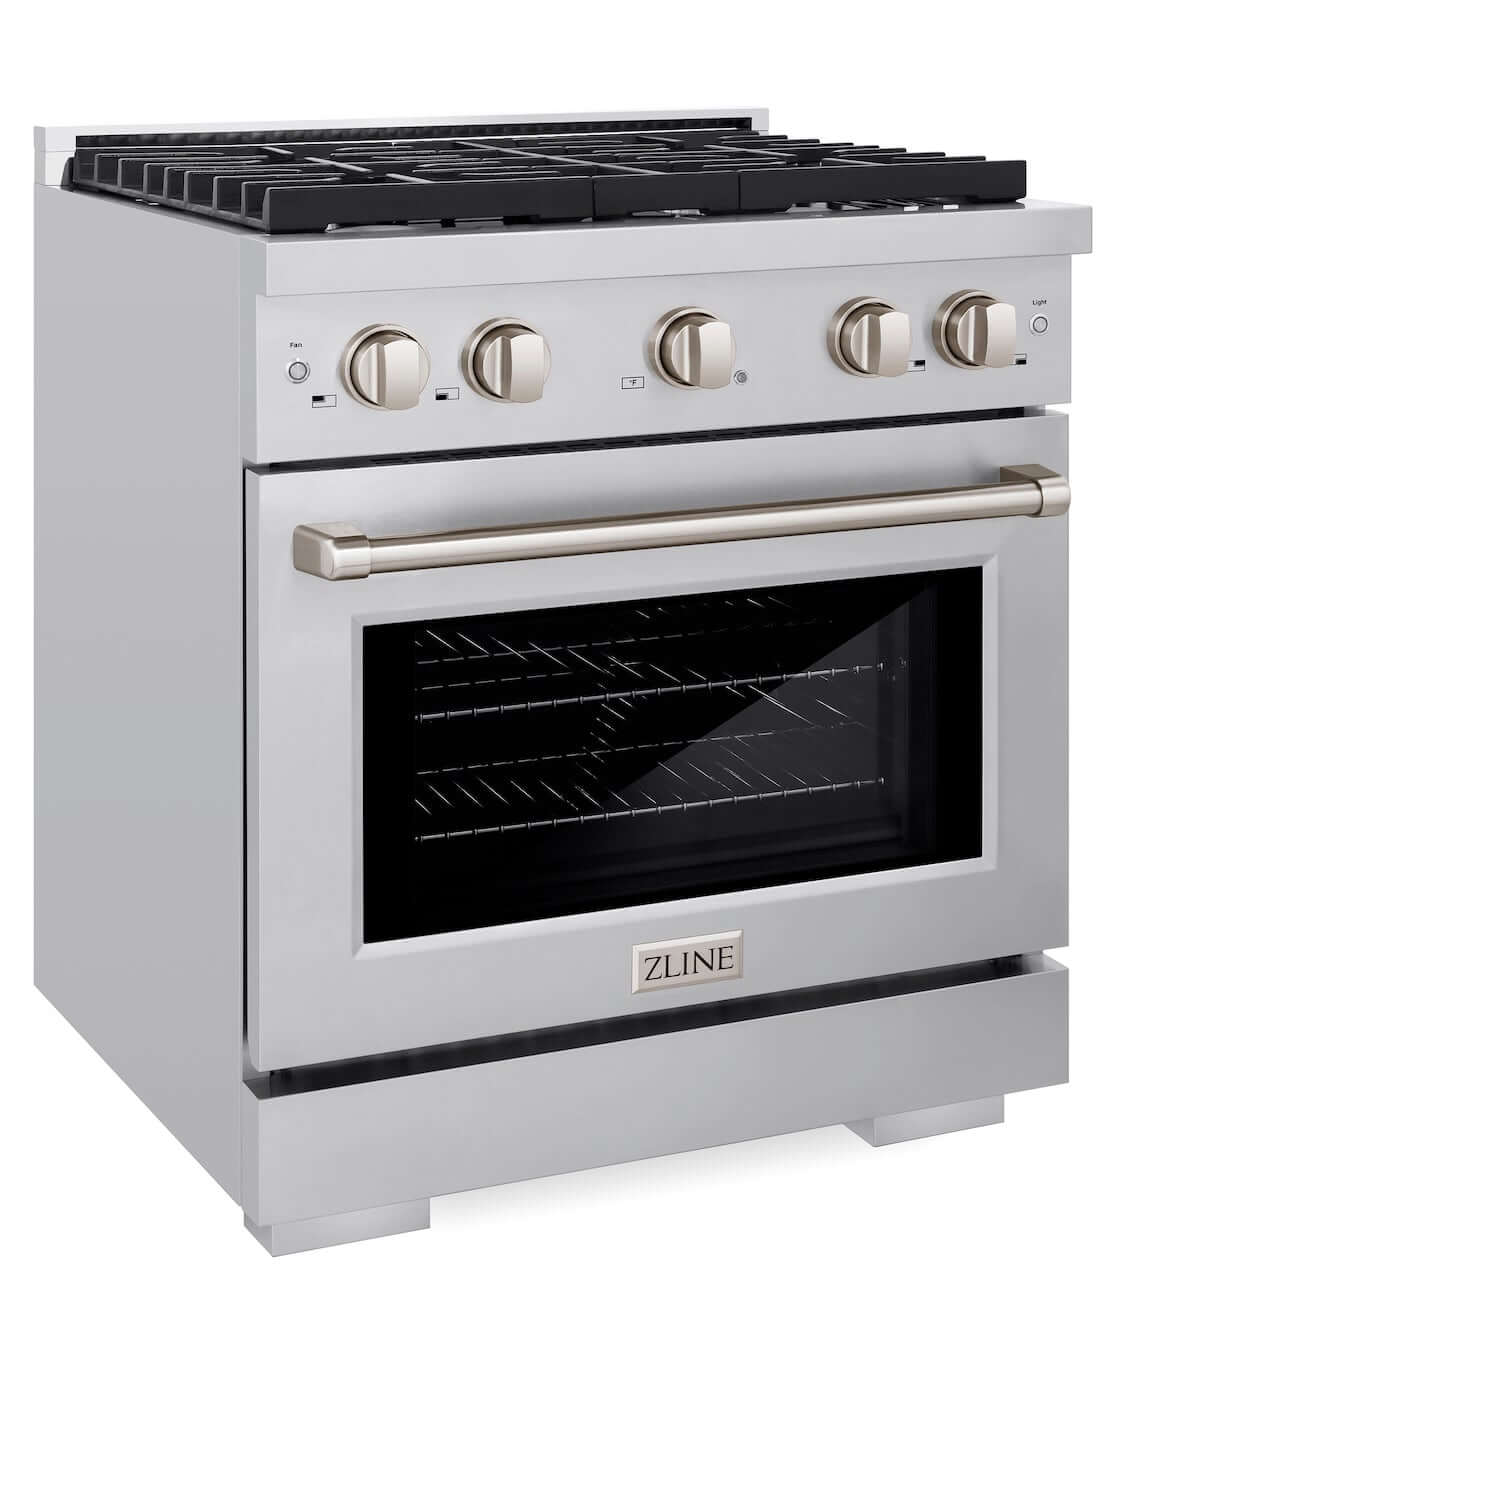 ZLINE 30" Stainless Steel Gas Range side angle with oven door closed.